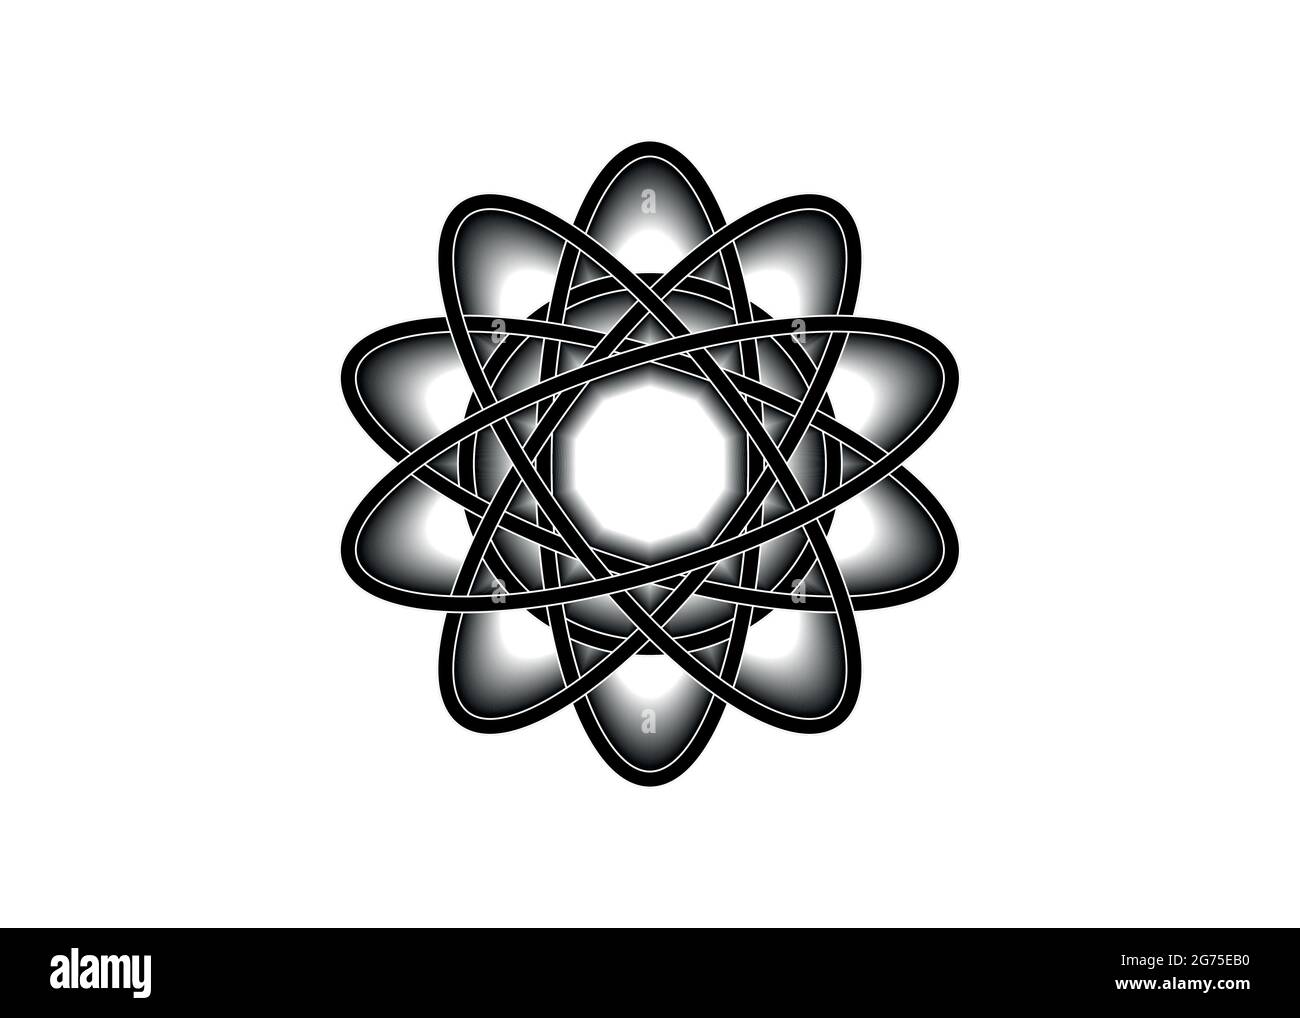 Pictograph of atom. Black line logo template in Celtic knot style on white background. Tribal symbol in circular mandala form. Tattoo sign ornament el Stock Vector